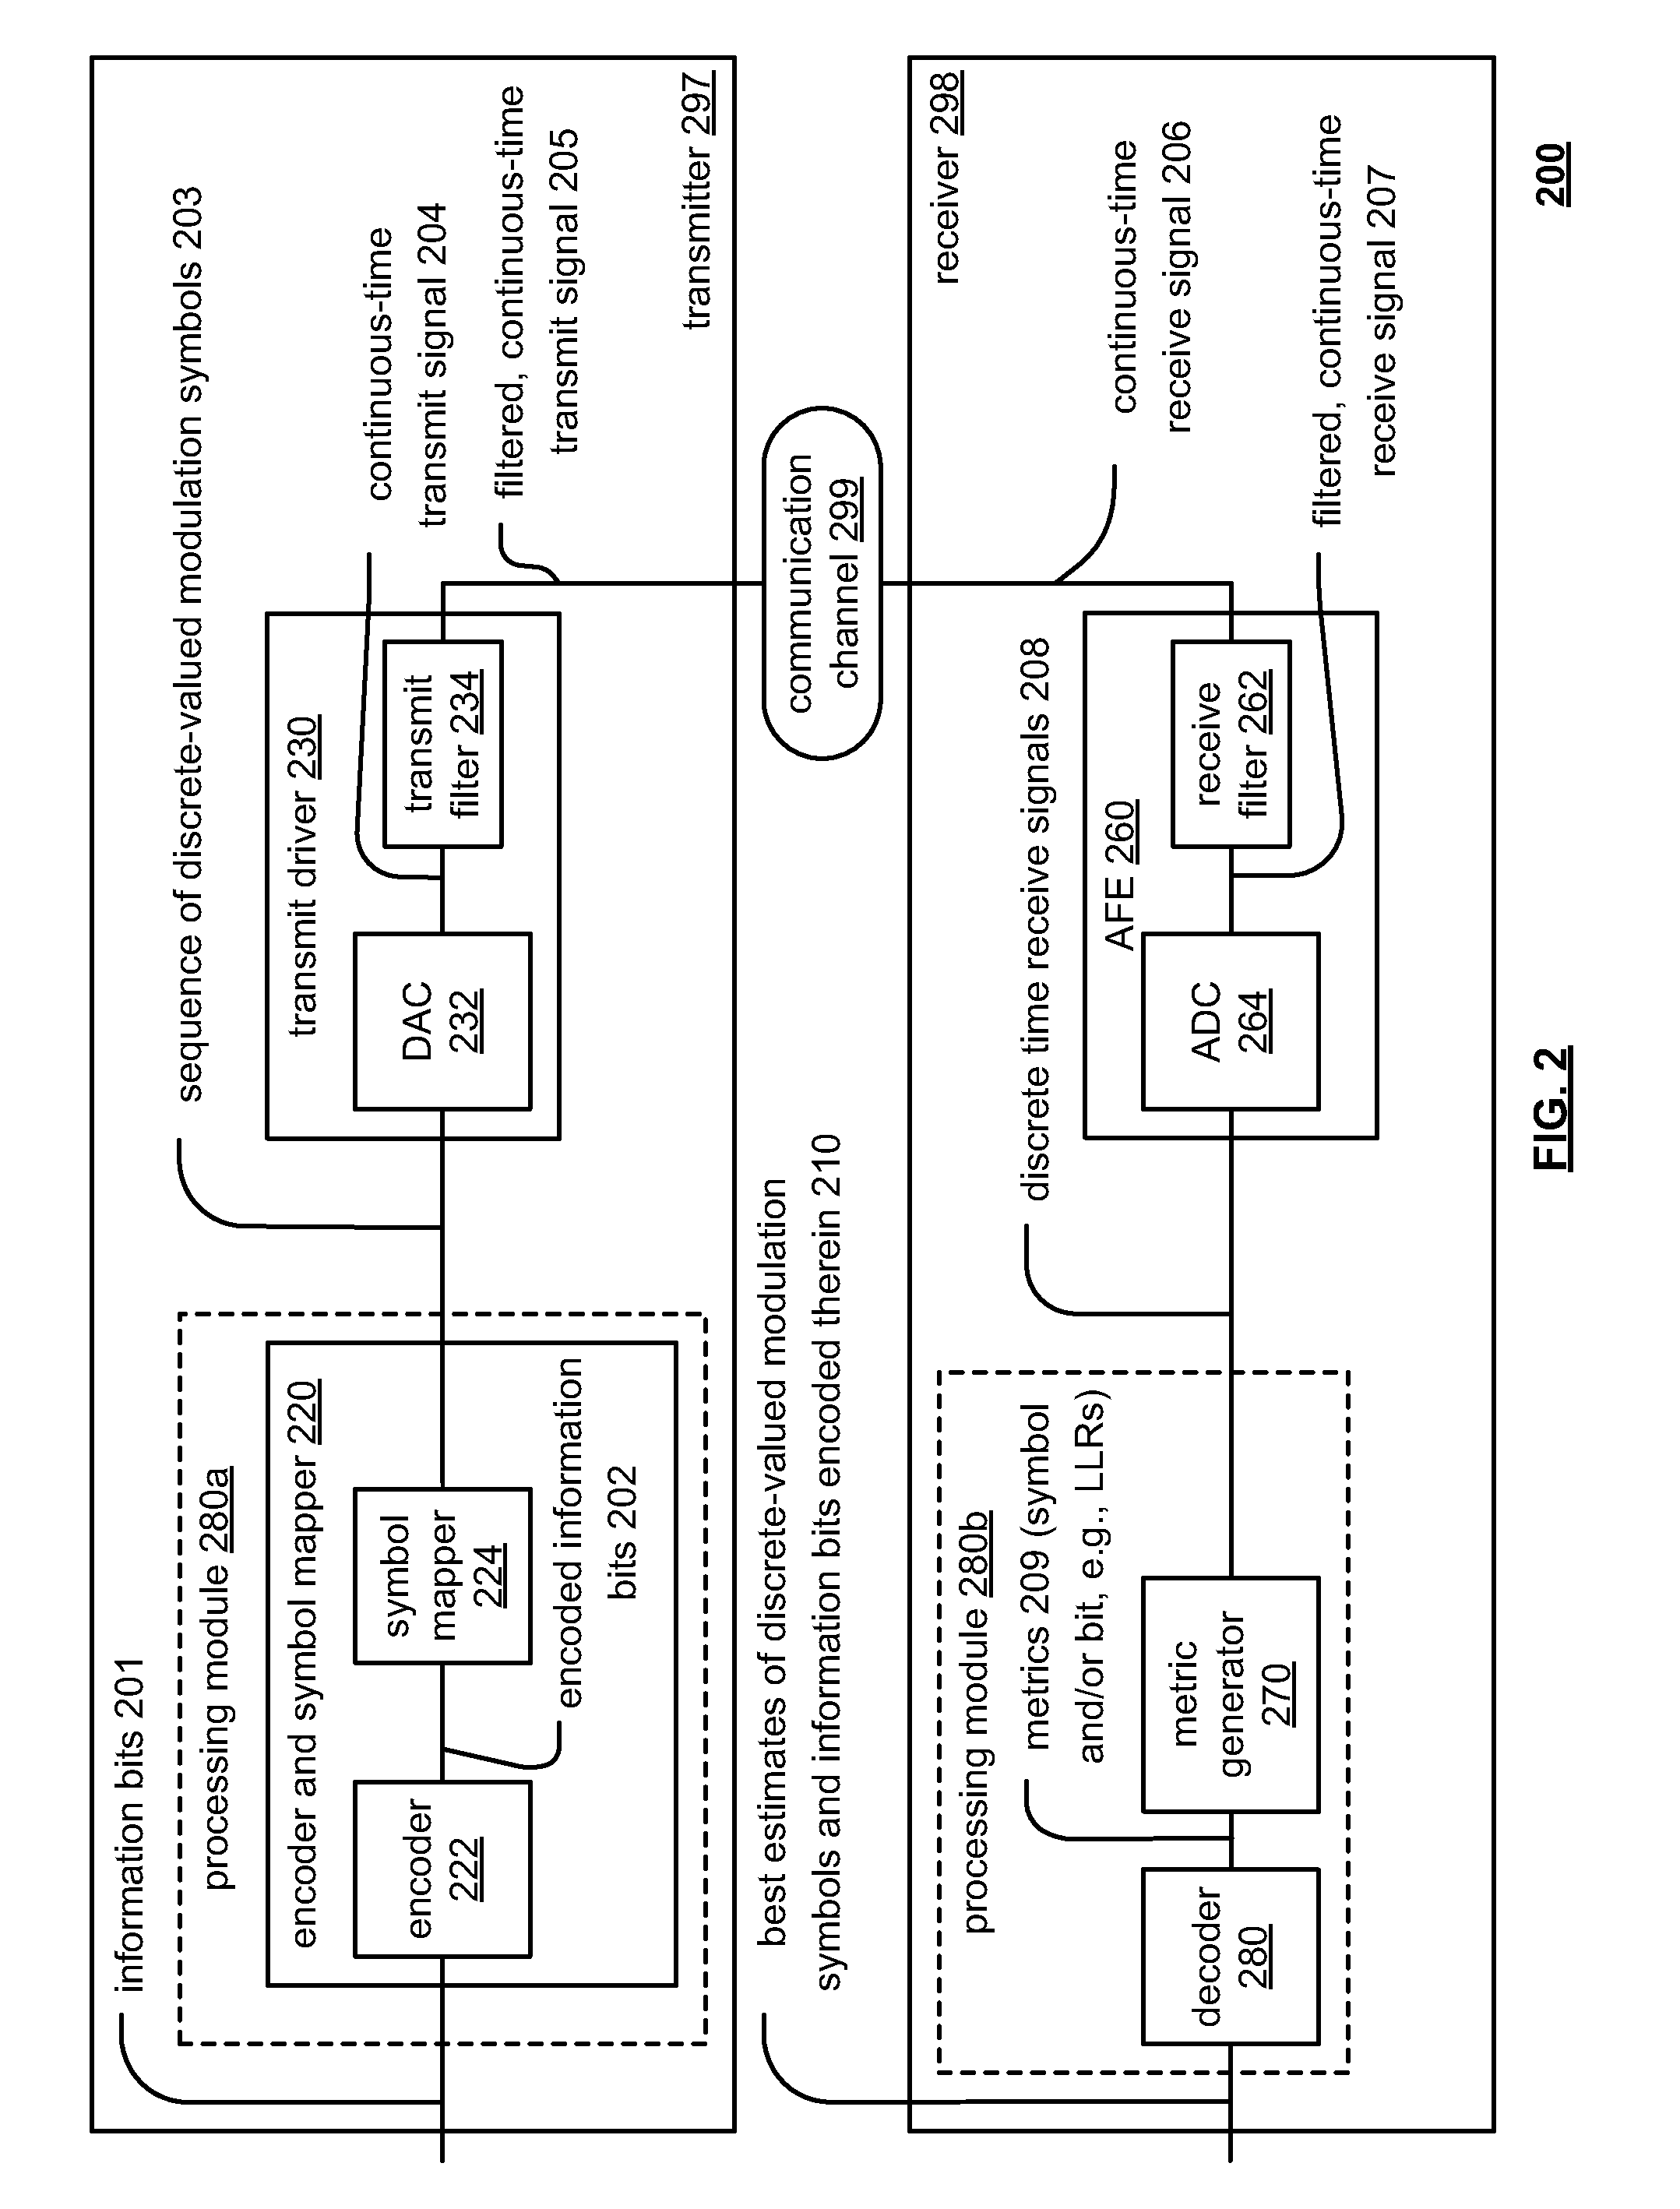 Convergent network architecture and path information